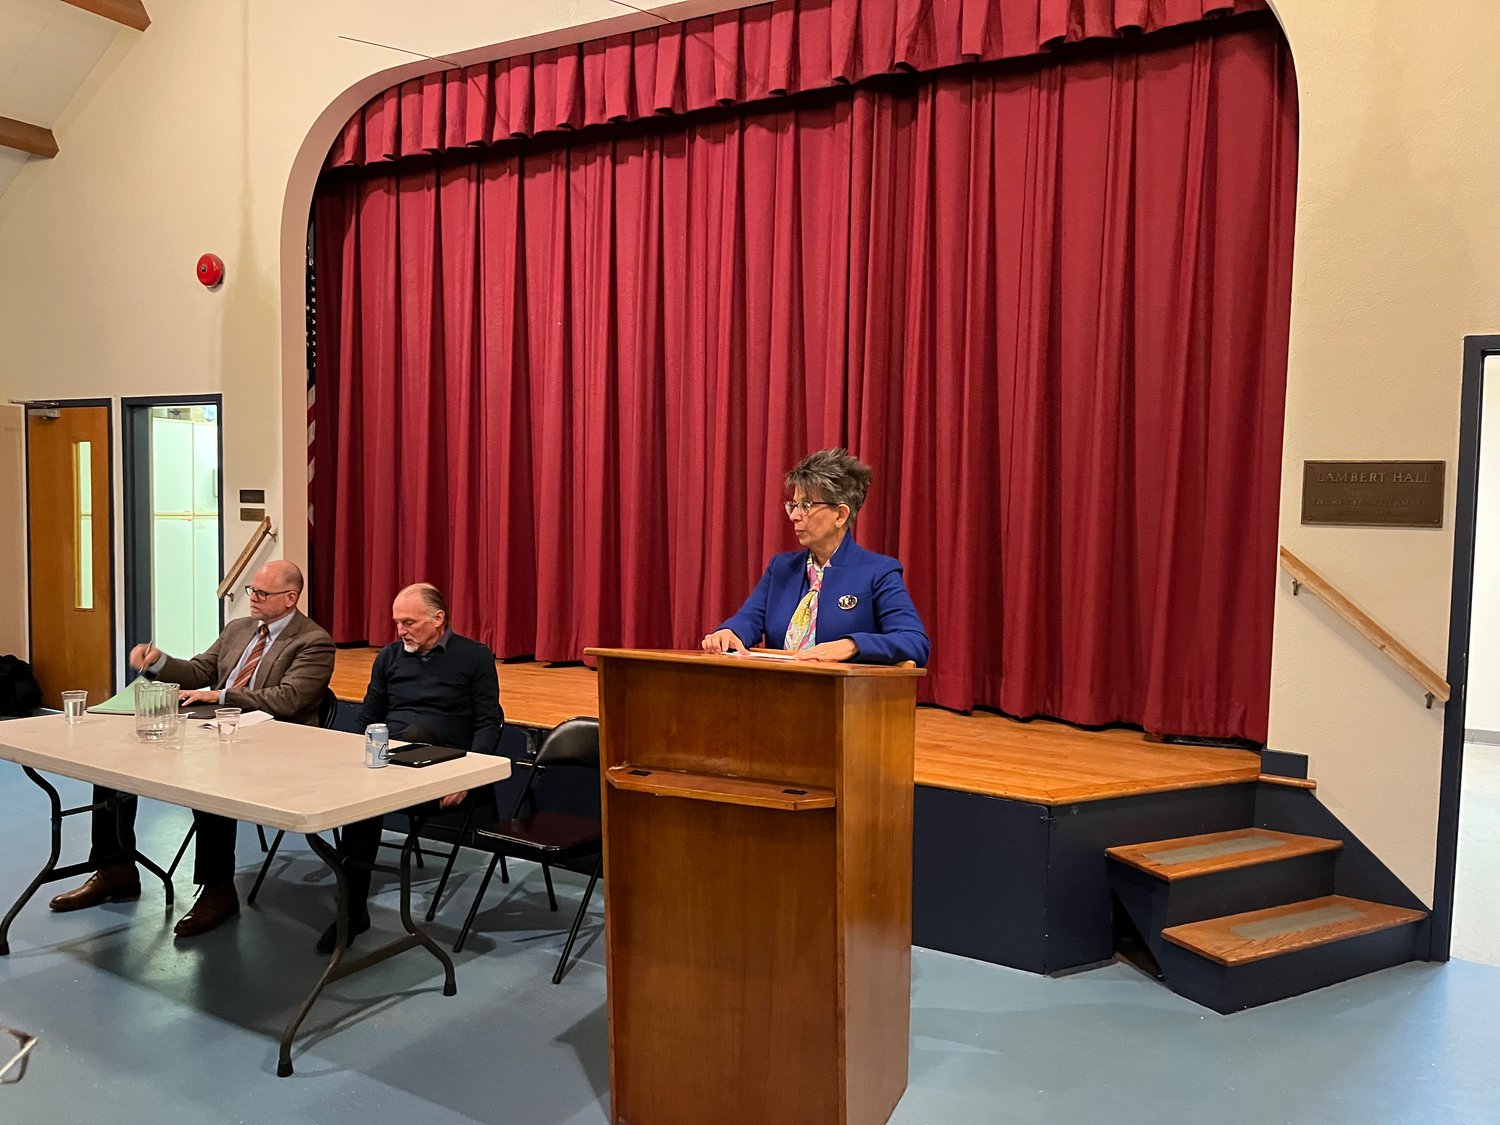 Elena Villafane, right, Mark Sobel and James Versocki each gave a brief introductory and outgoing speech and fielded questions from Sea Cliff residents.